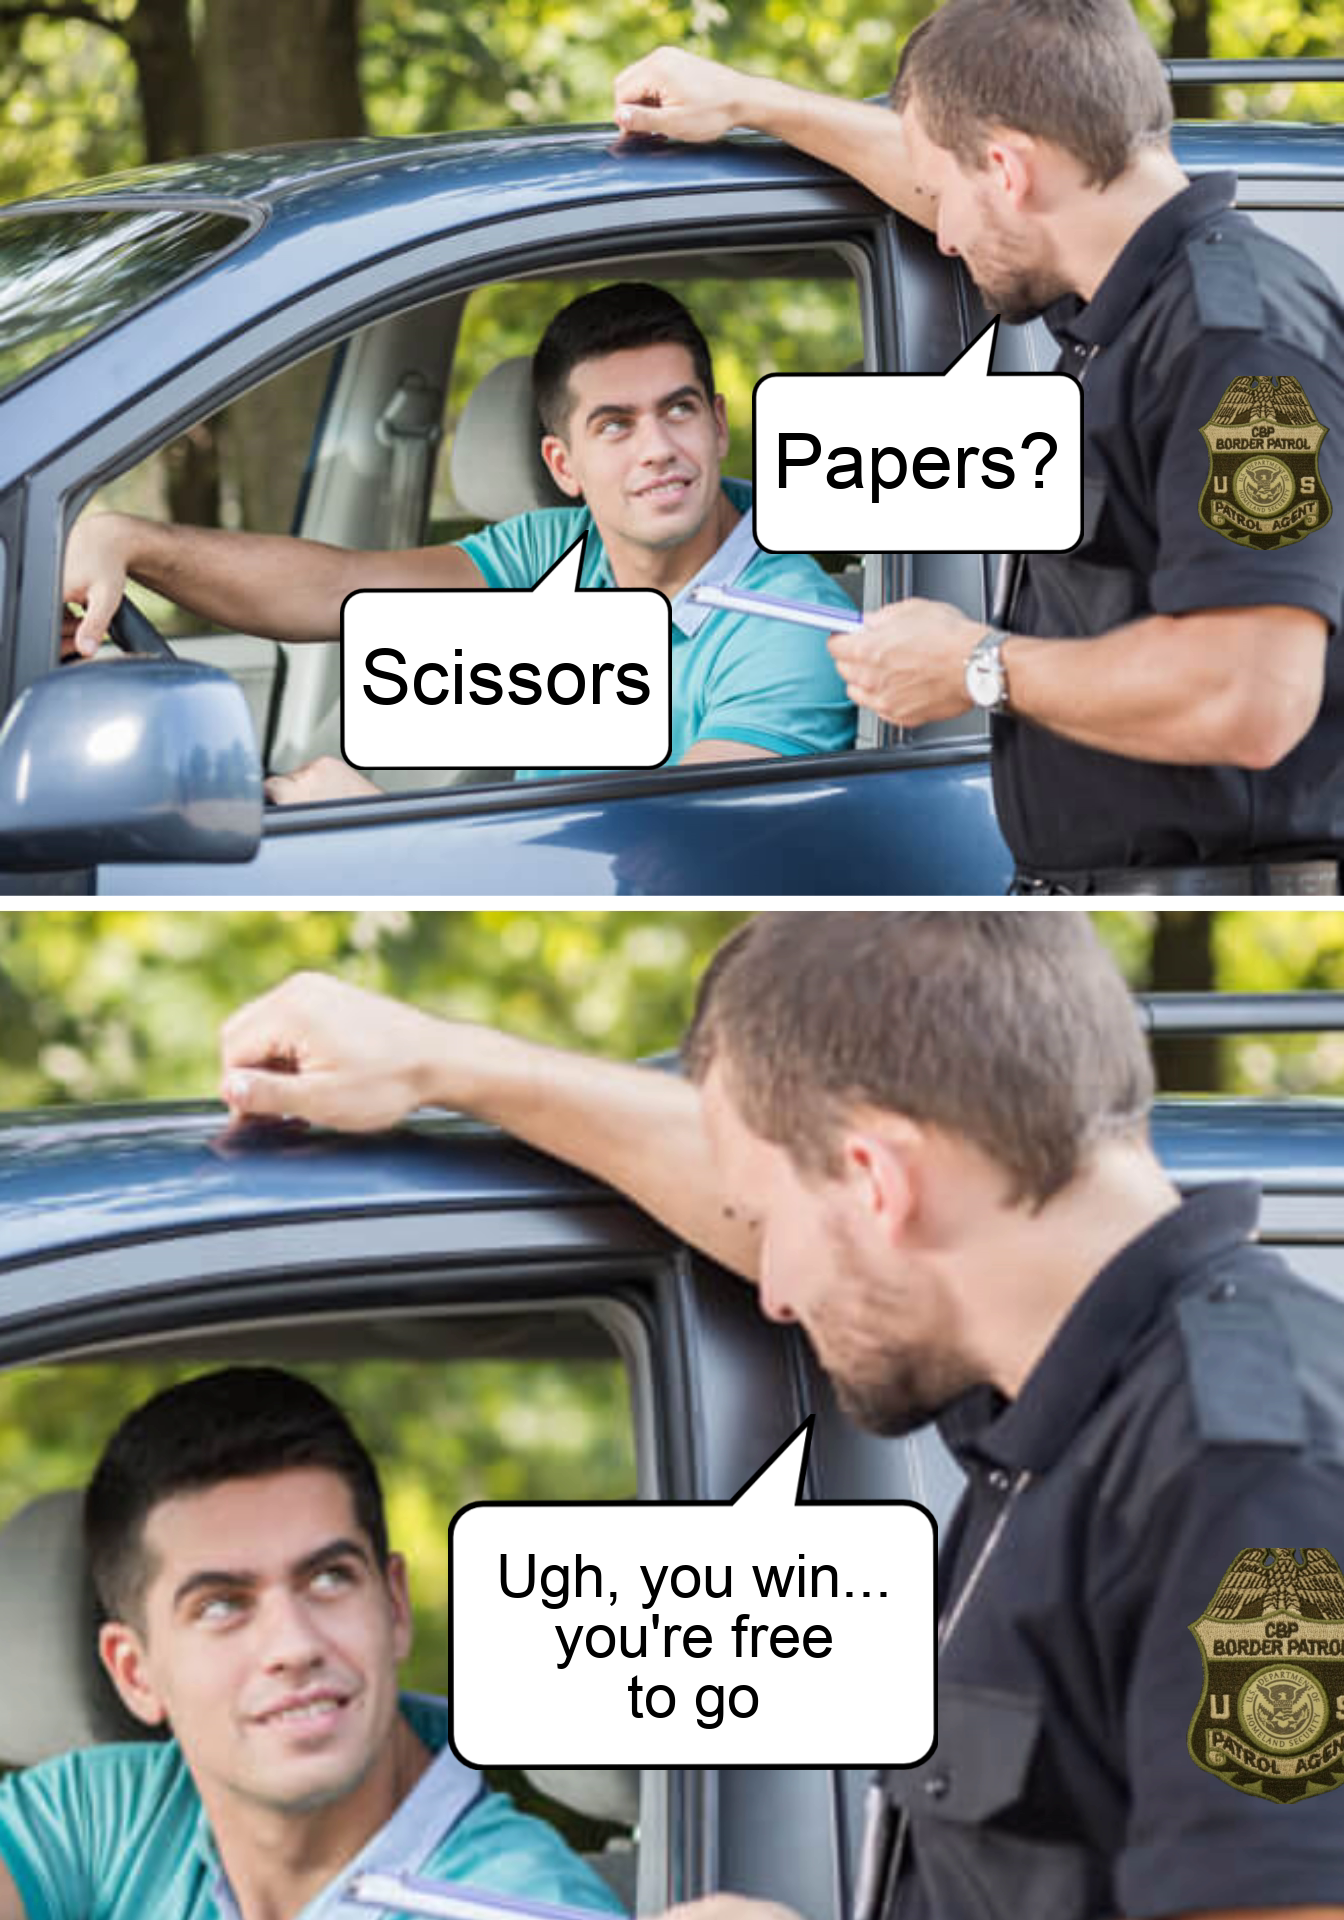 Image of a man pulling someone over saying "paper? scissors. Ugh you win...you're free to go"